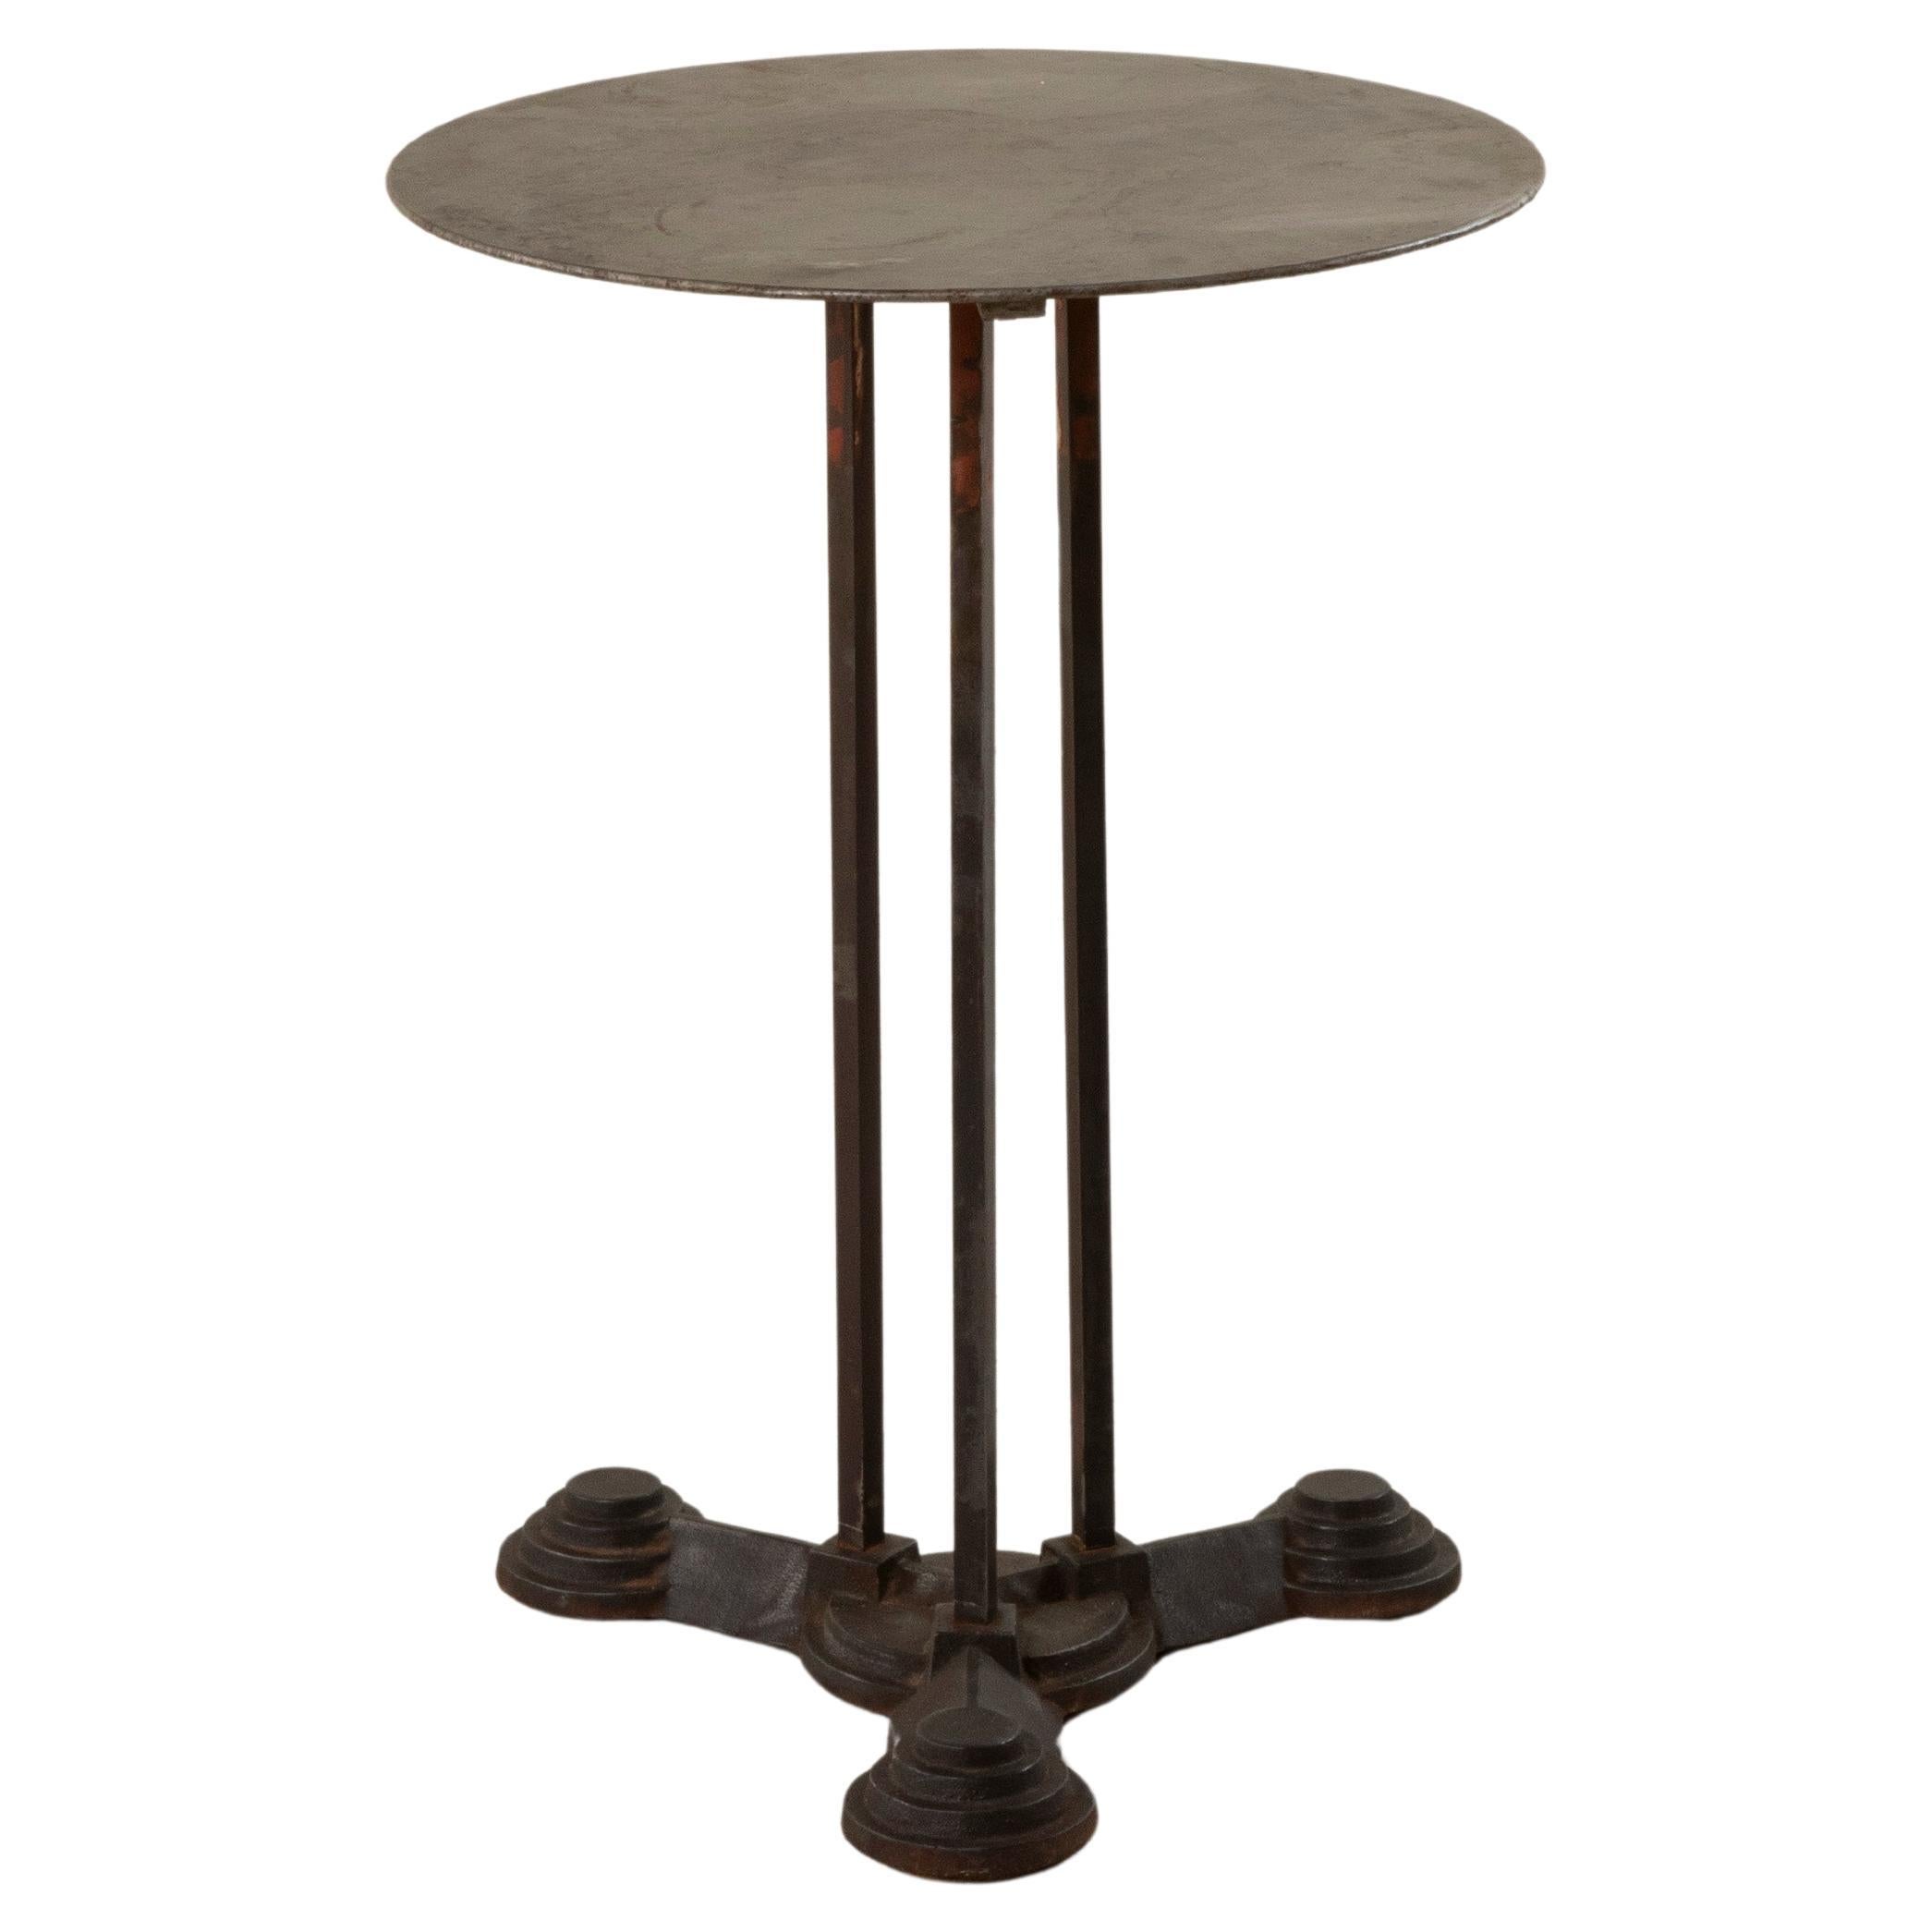 Early 20th Century French Art Deco Period Iron Bistro Table, Garden Table